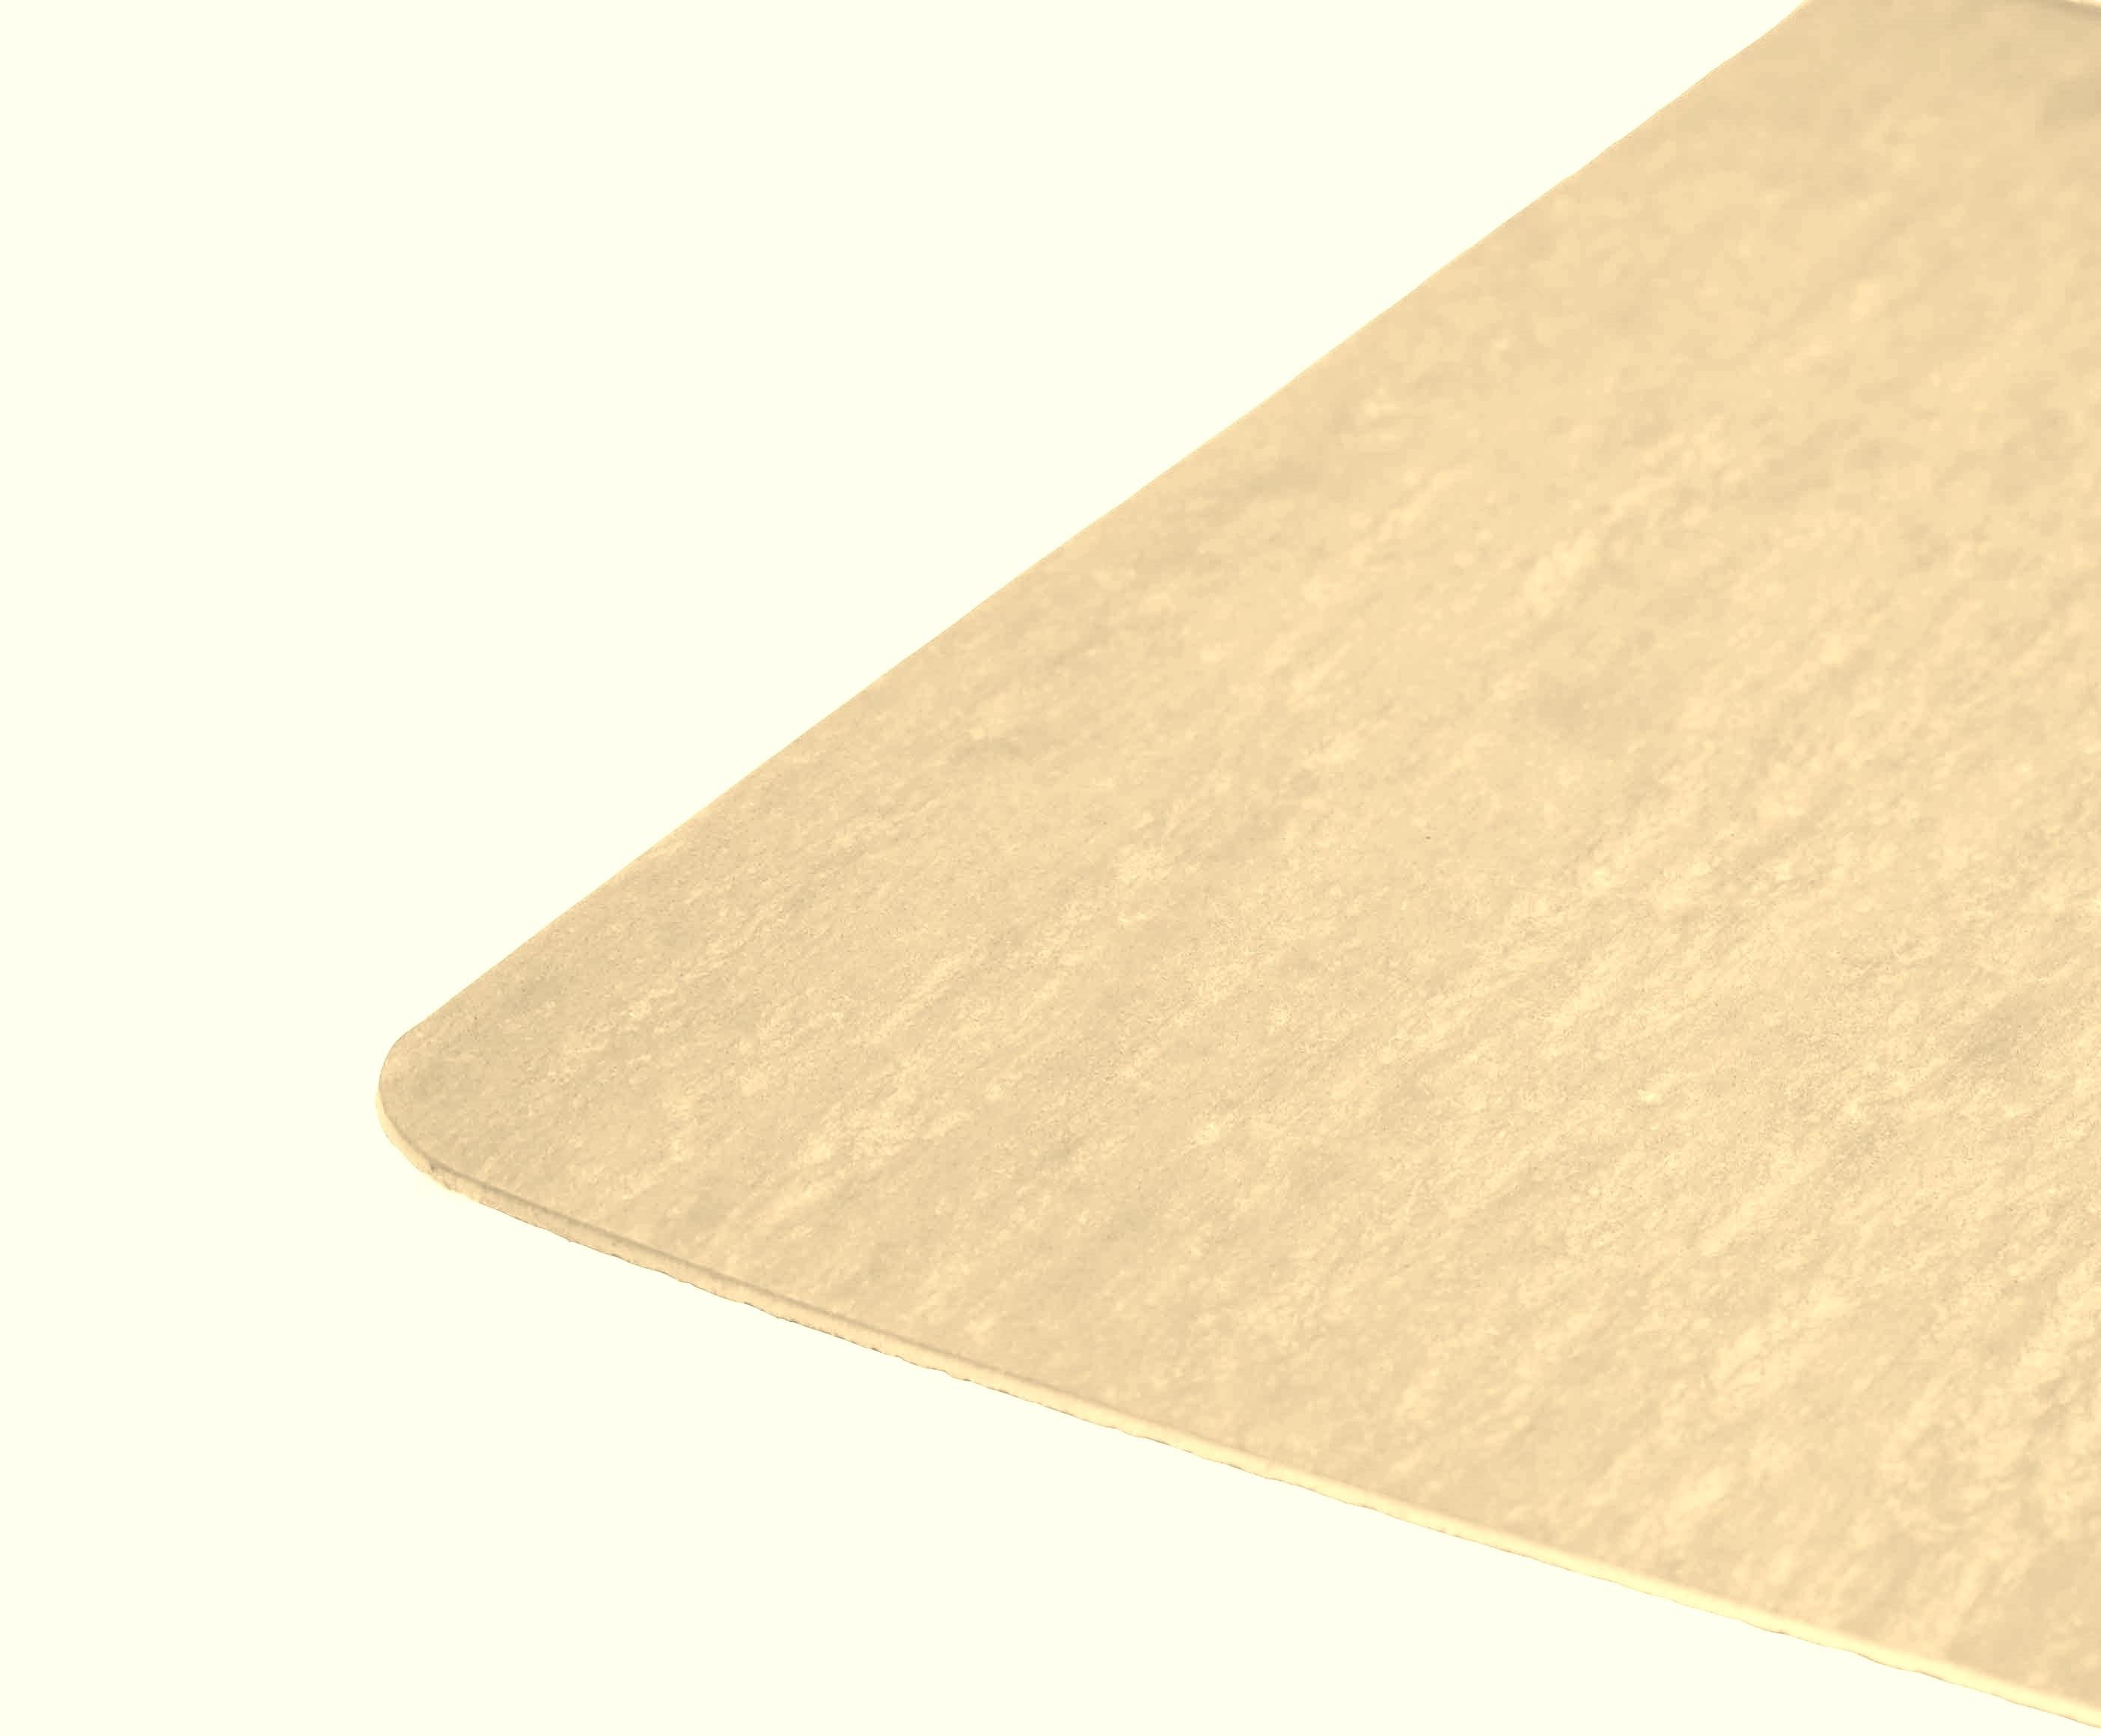 J201Red Silica Filled PTFE Jointing Sheet for use with Chemicals, Acids & Alkalis.